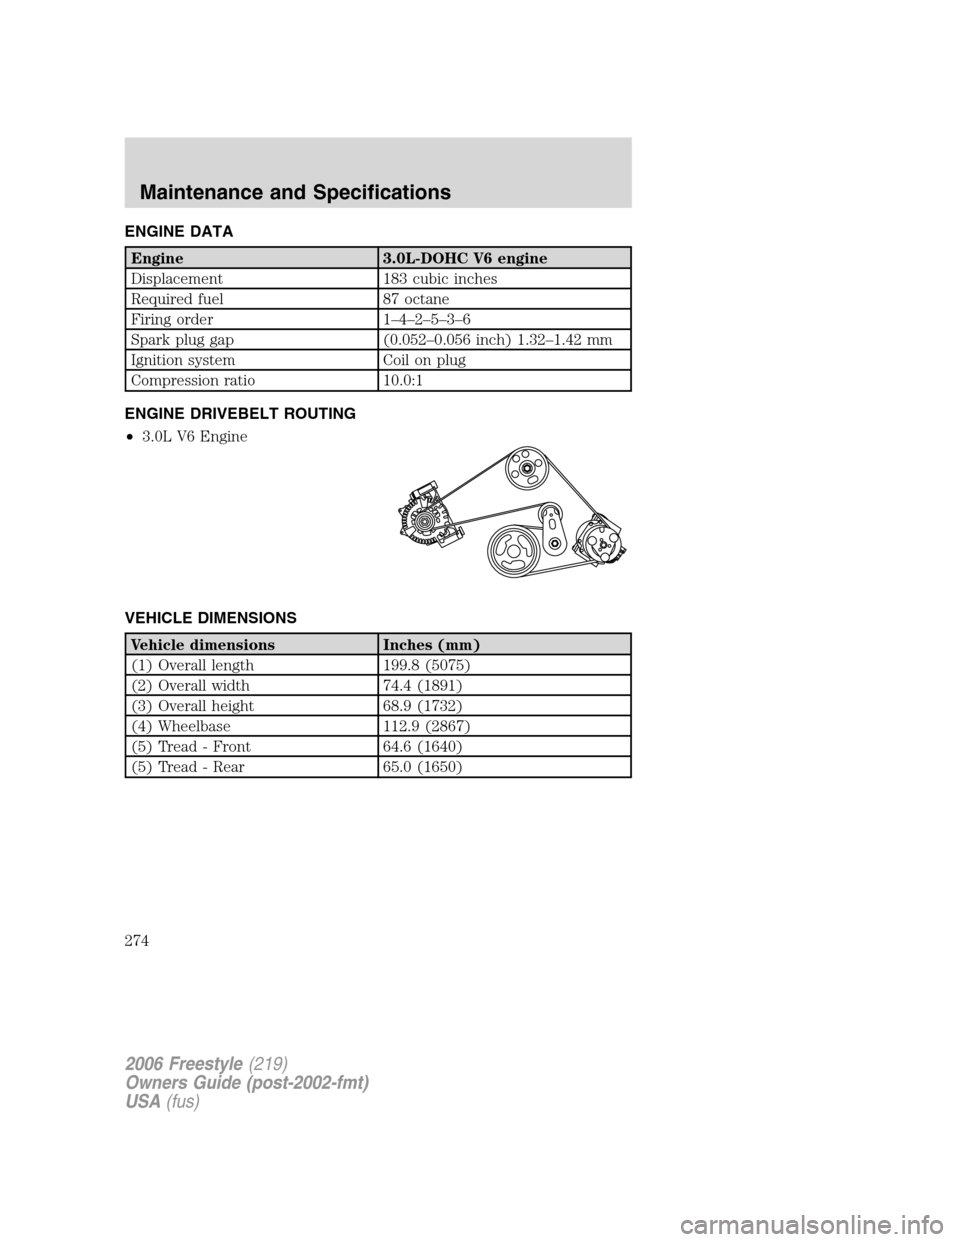 FORD FREESTYLE 2006 1.G Owners Manual ENGINE DATA
Engine 3.0L-DOHC V6 engine
Displacement 183 cubic inches
Required fuel 87 octane
Firing order 1–4–2–5–3–6
Spark plug gap (0.052–0.056 inch) 1.32–1.42 mm
Ignition system Coil 